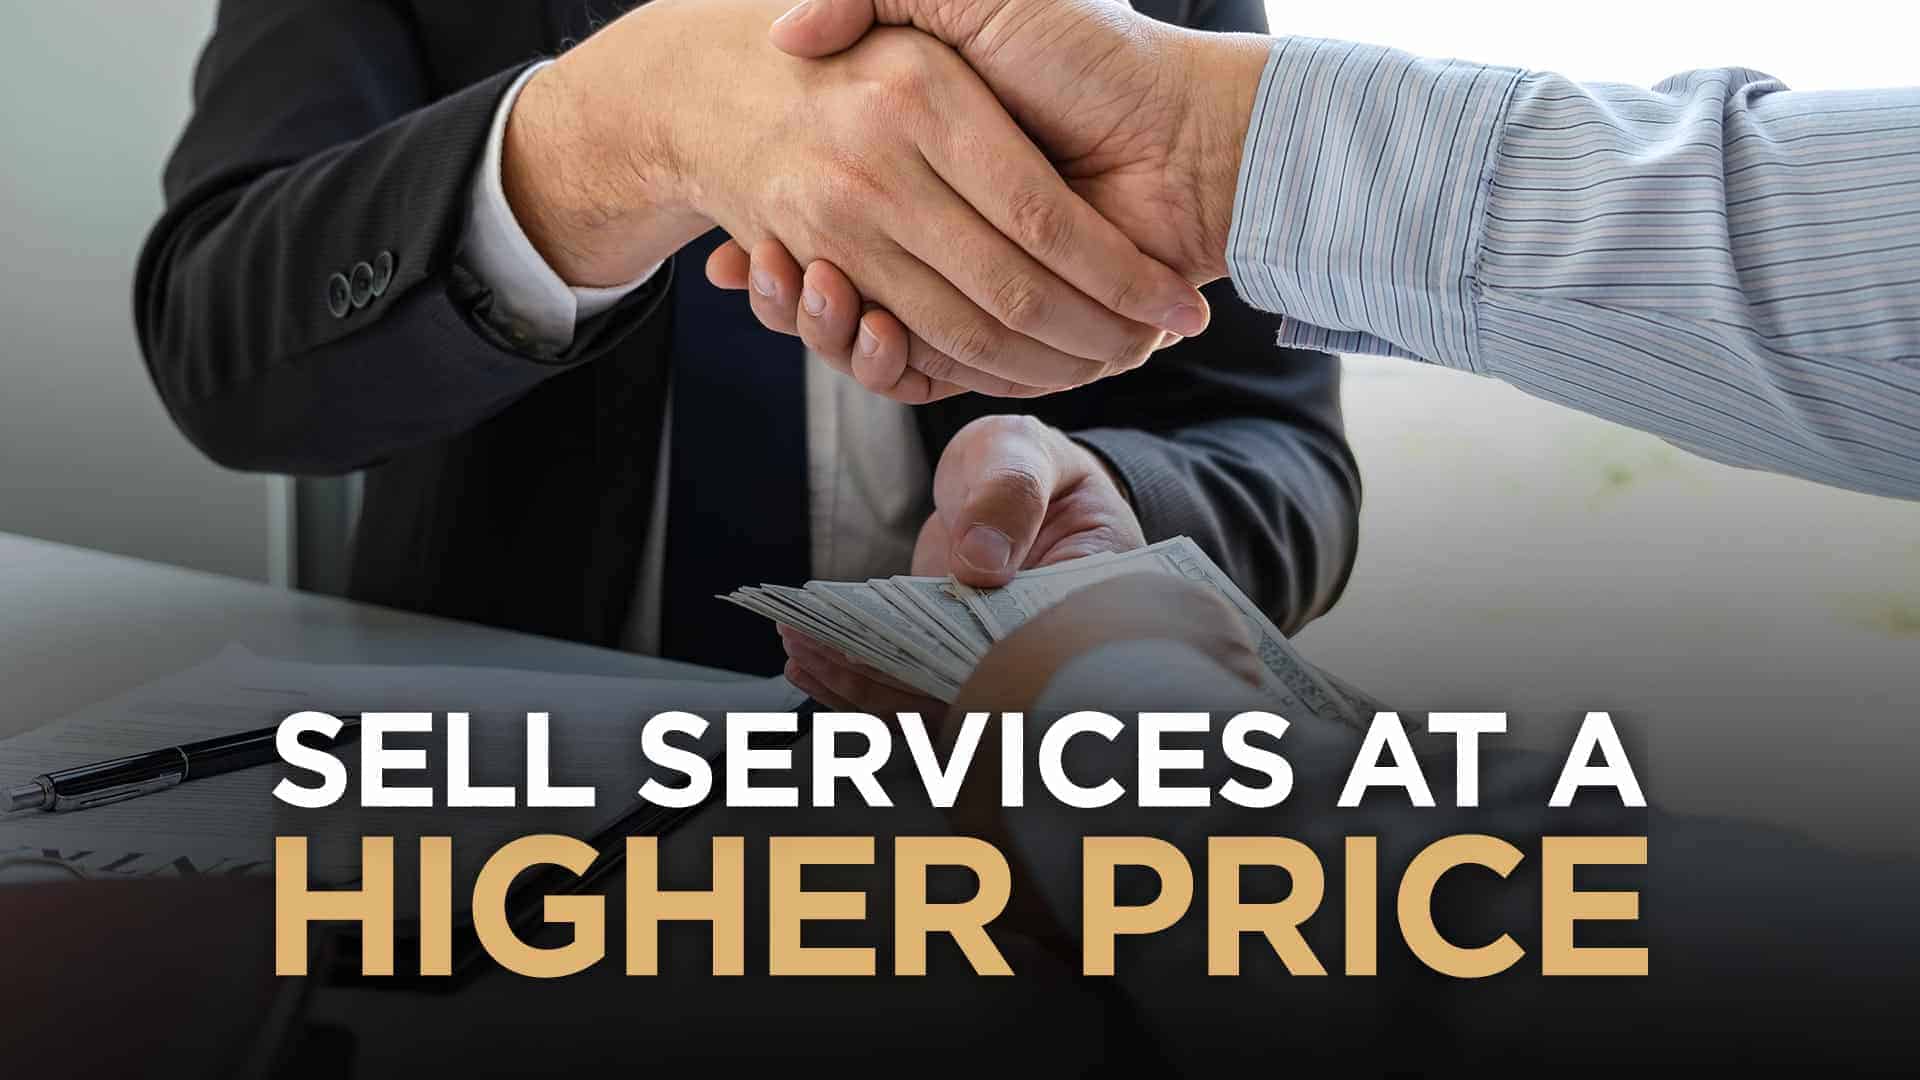 How To Sell Your Services At A Higher Price